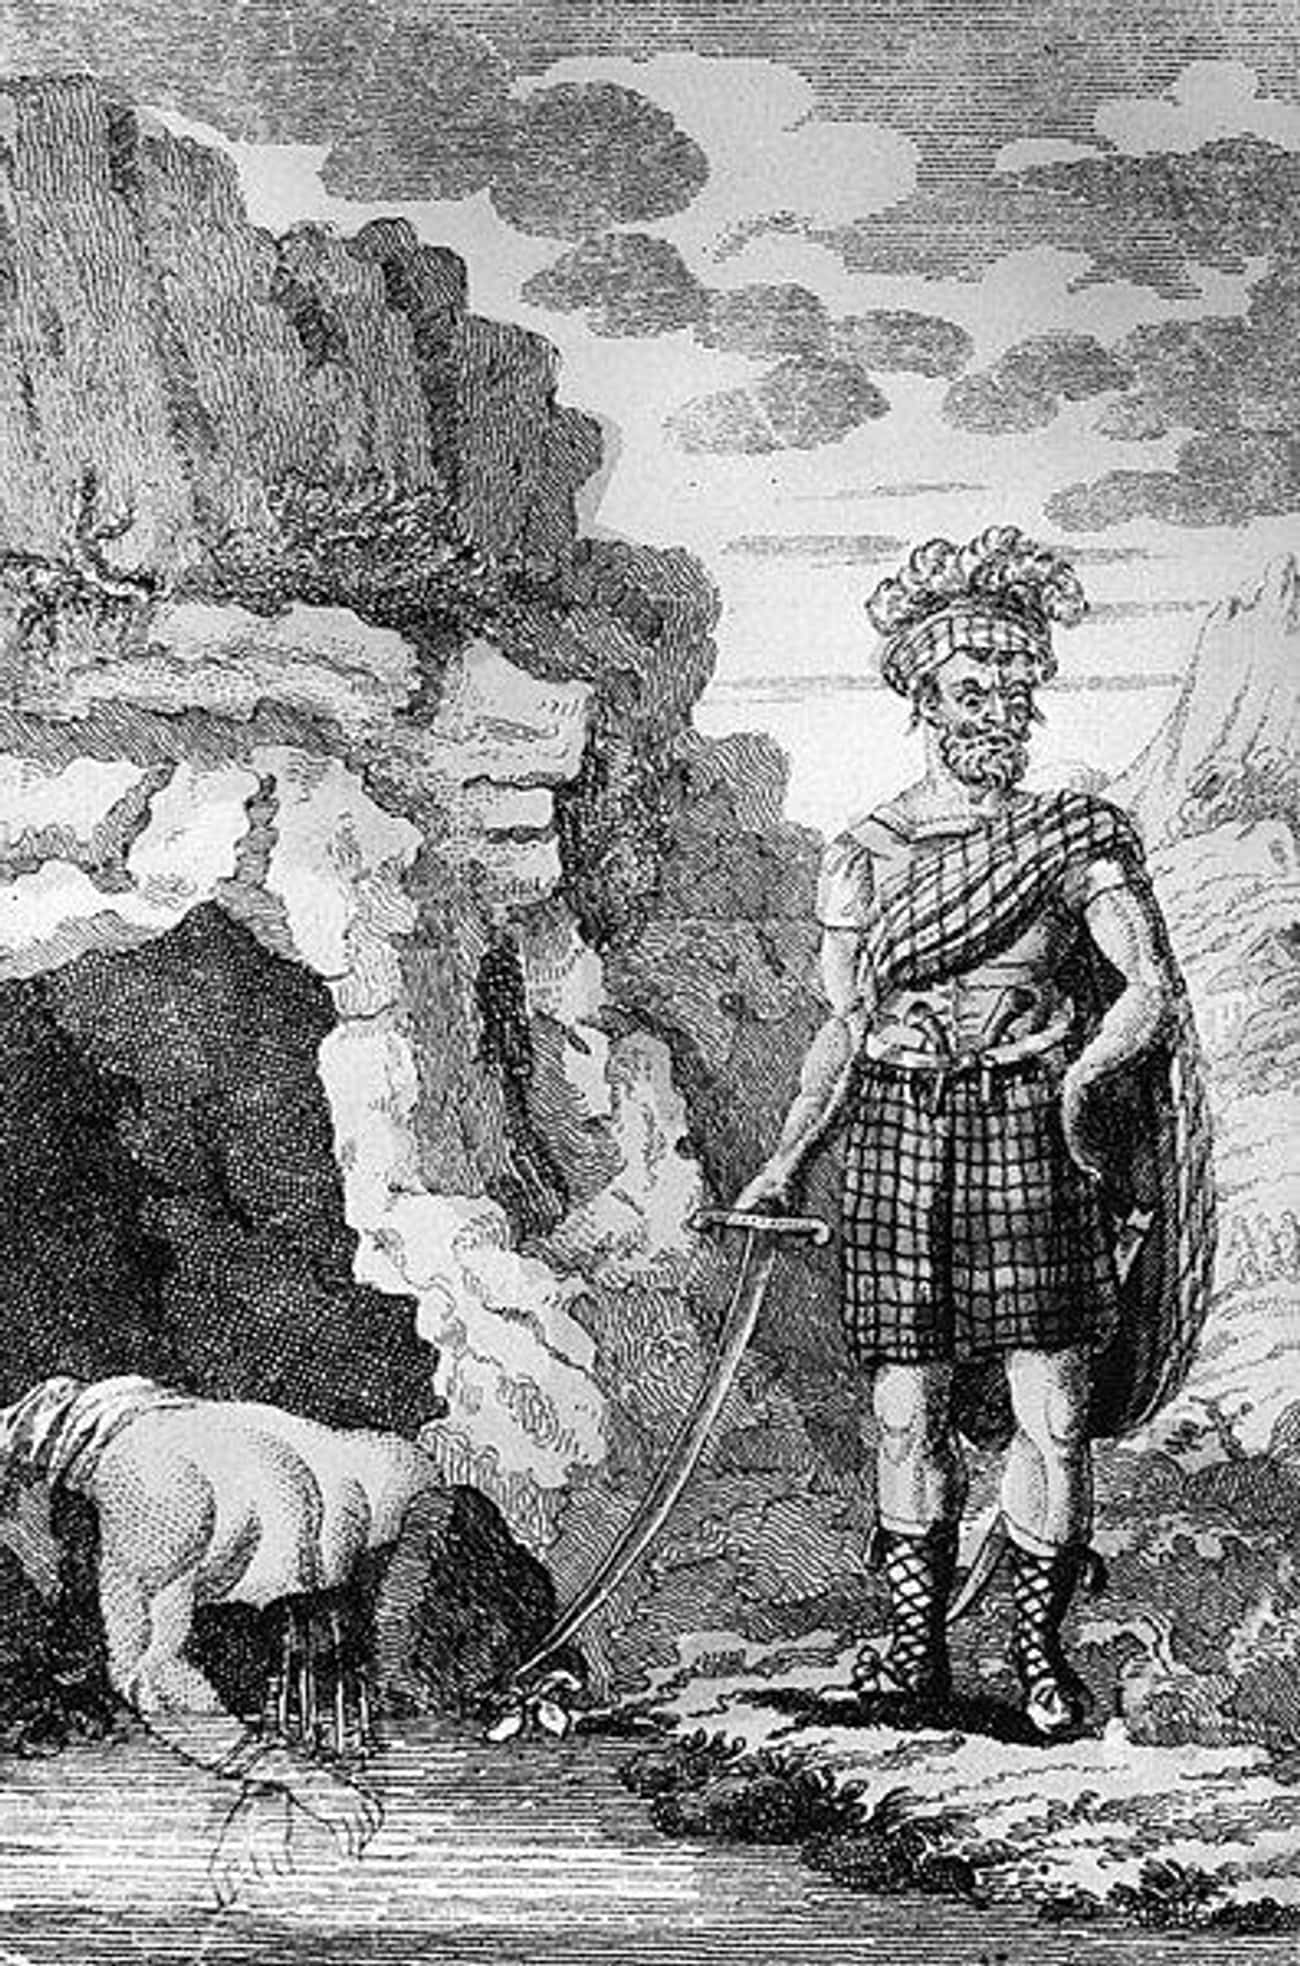 Sawney Bean Reportedly And Killed Travelers And Ate Their Bodies So He Couldn't Be Identified